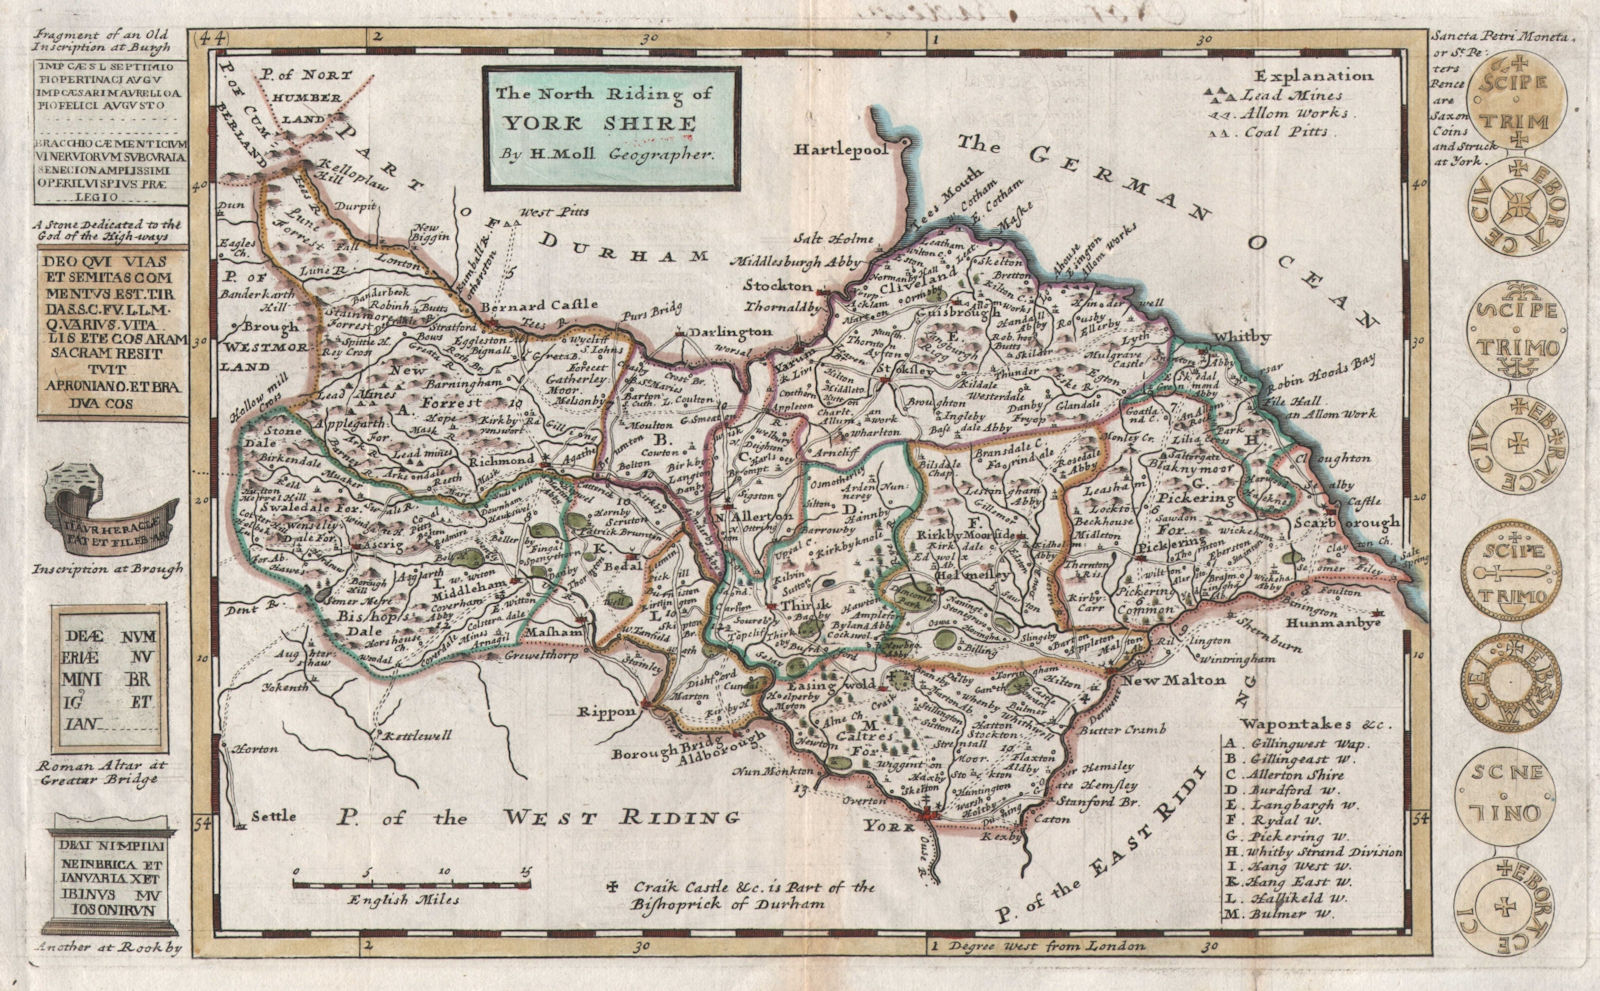 "The North Riding of York Shire", by Hermann Moll. Yorkshire 1724 old map